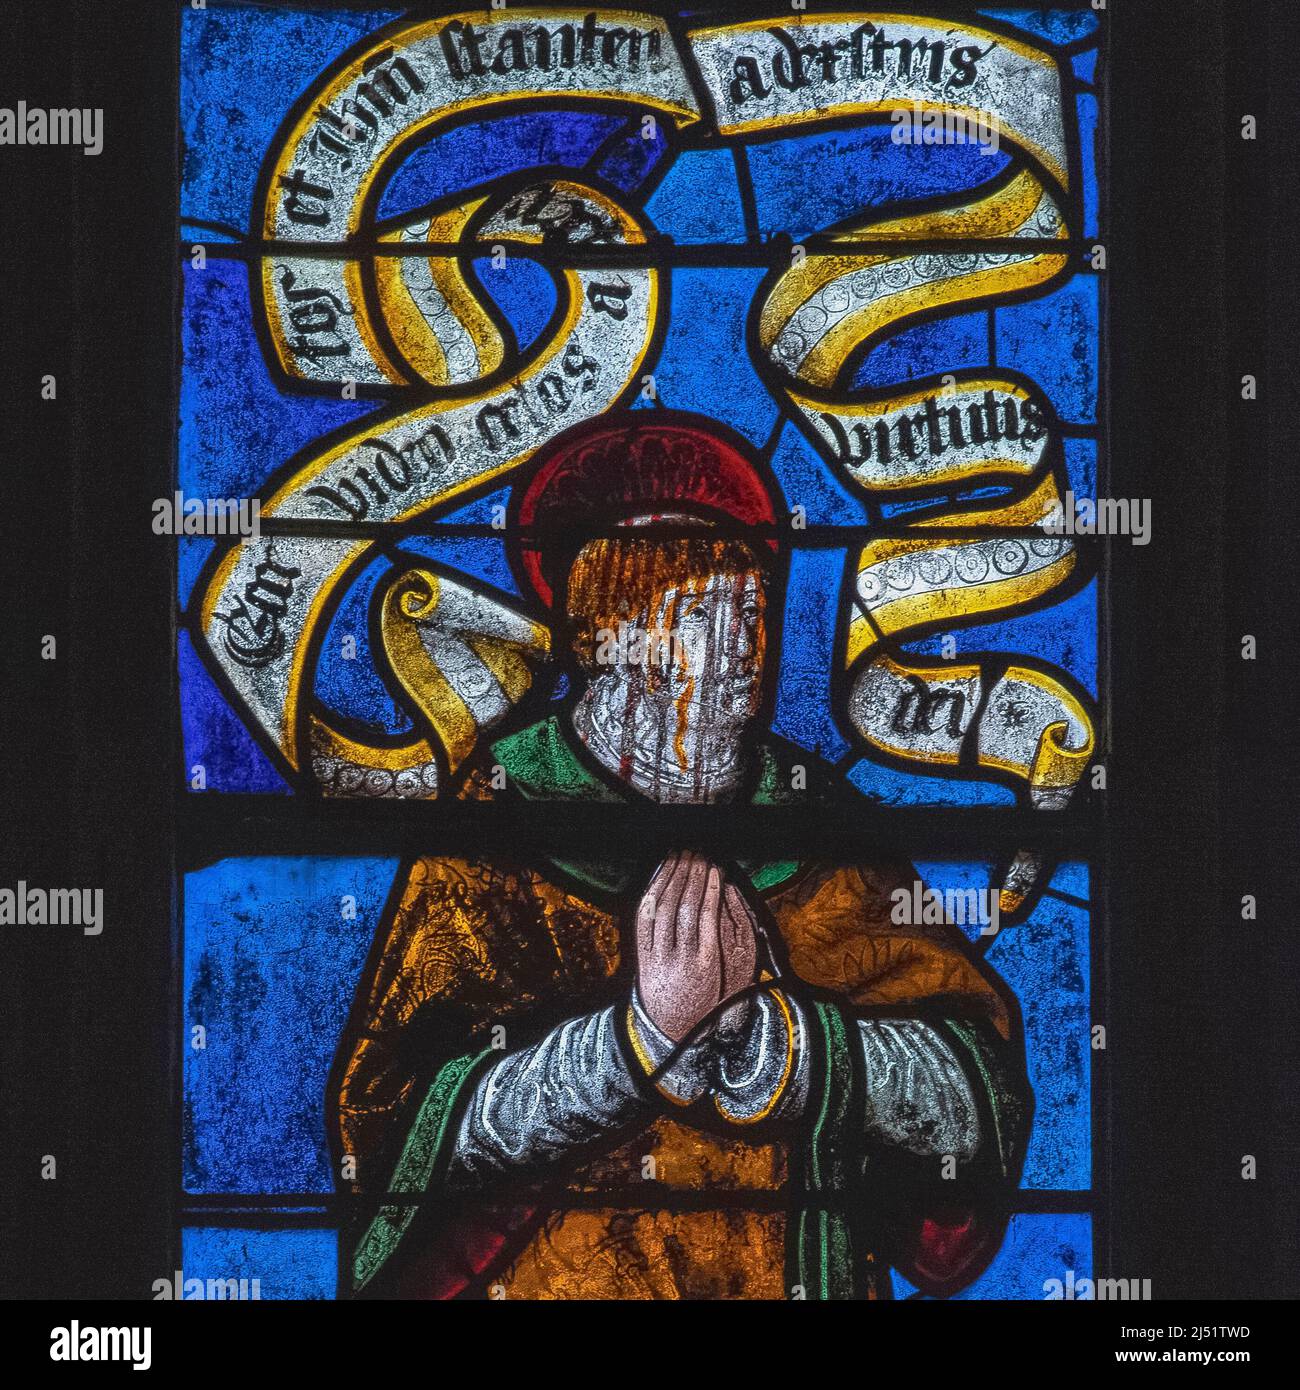 Stoical in death: blood streams down the face of Christianity's first martyr, Saint Stephen, as he kneels in prayer waiting to die under a barrage of rocks and stones: square detail of central panel in window of early 1500s stained glass in the Église Saint-Rémi at Ceffonds, in the Champagne region of northeast France.  The window also depicts Stephen's two executioners. Stock Photo